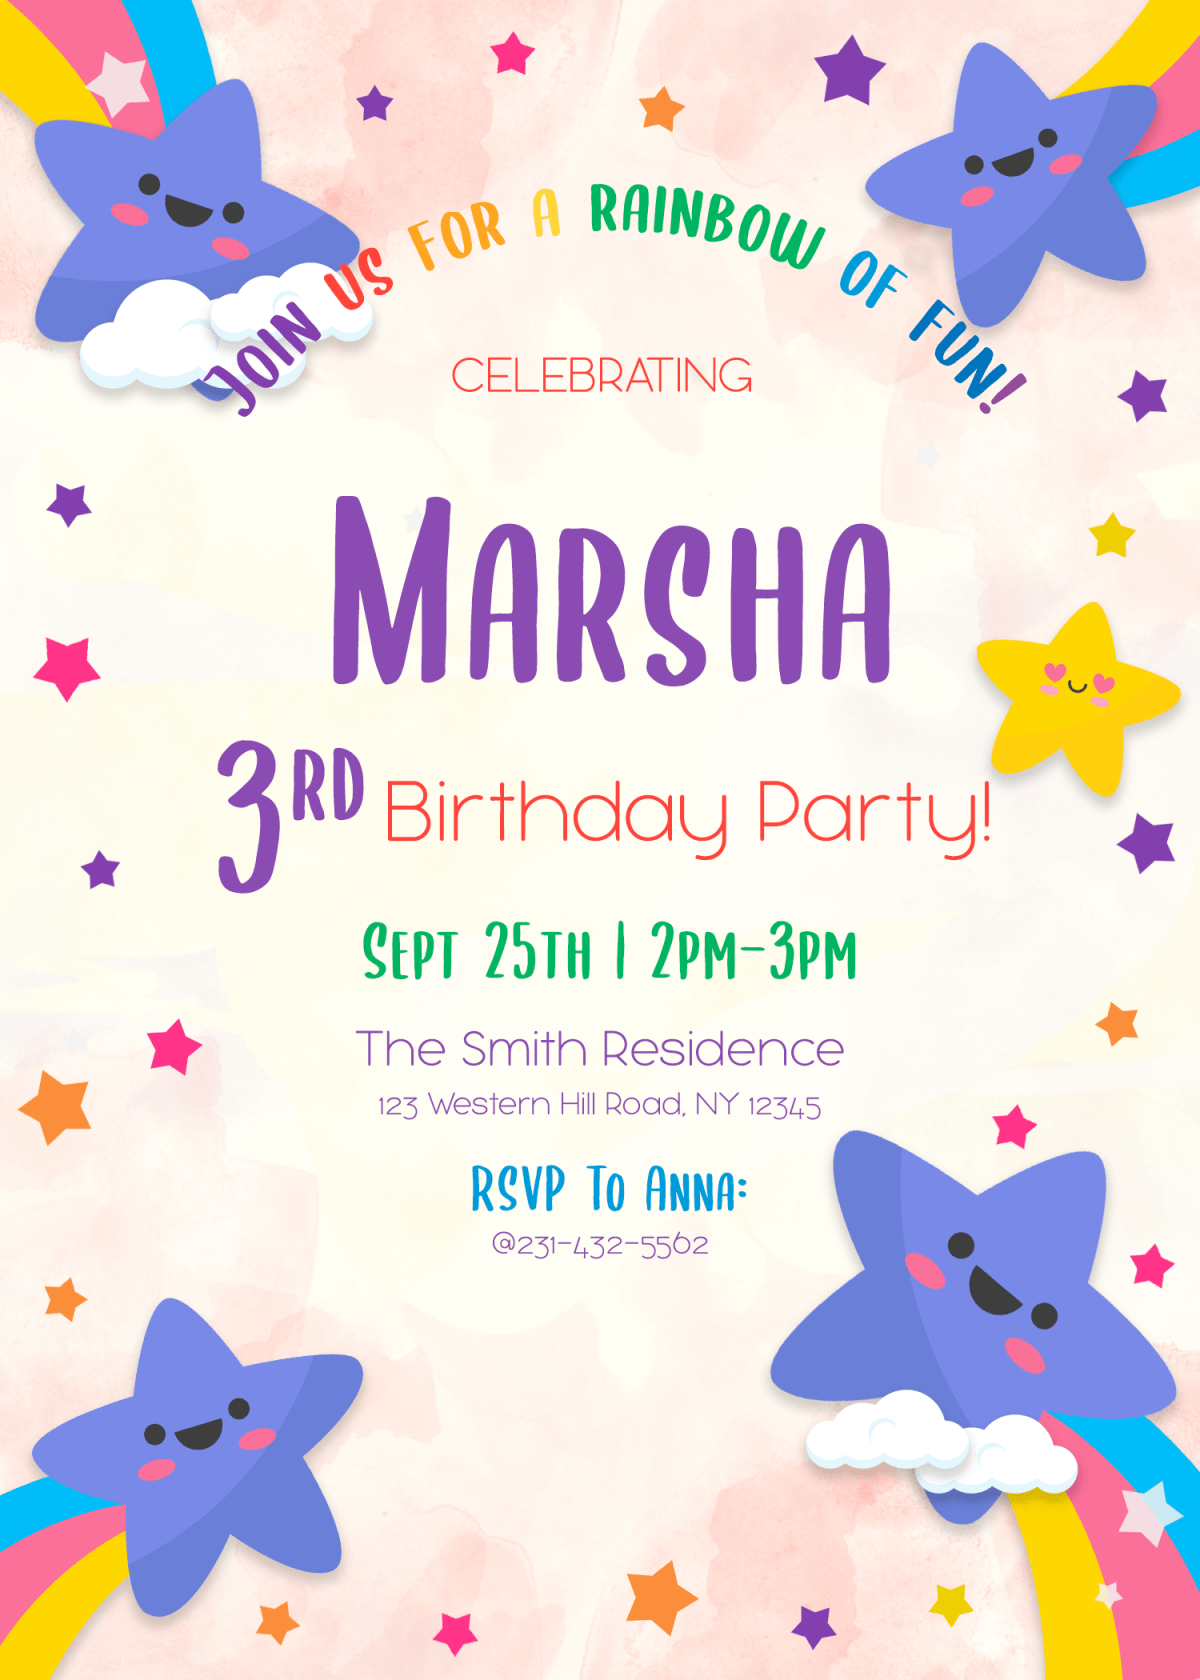 9+ Colorful Rainbow Invitation Card Templates For A Whimsical Birthday Party